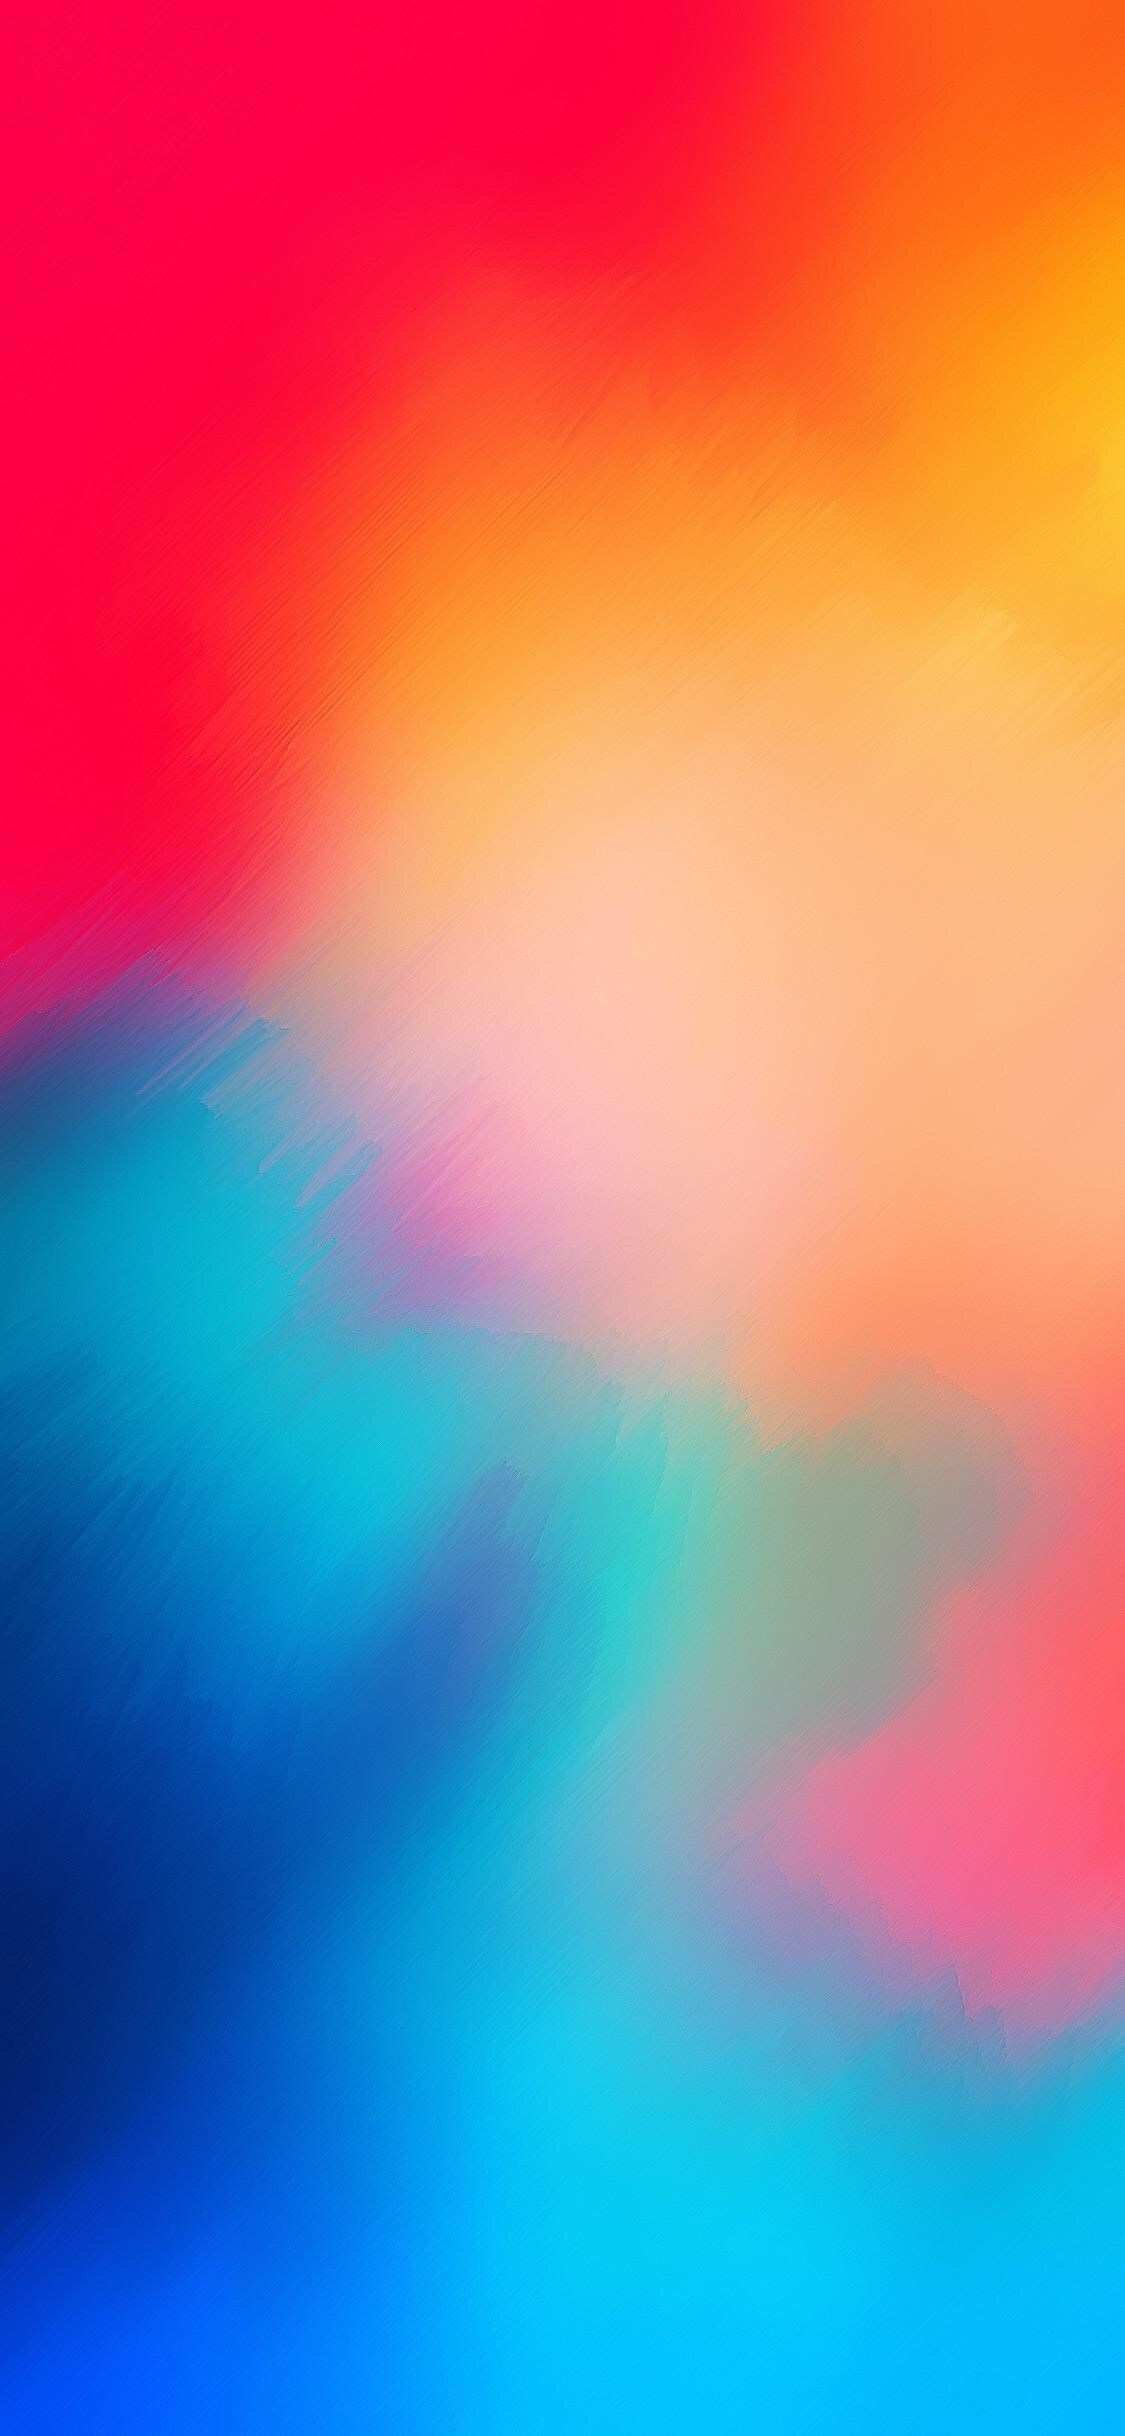 iPhone 8 Wallpaper 4k New Ios 11 iPhone X Blue Red Abstract Apple